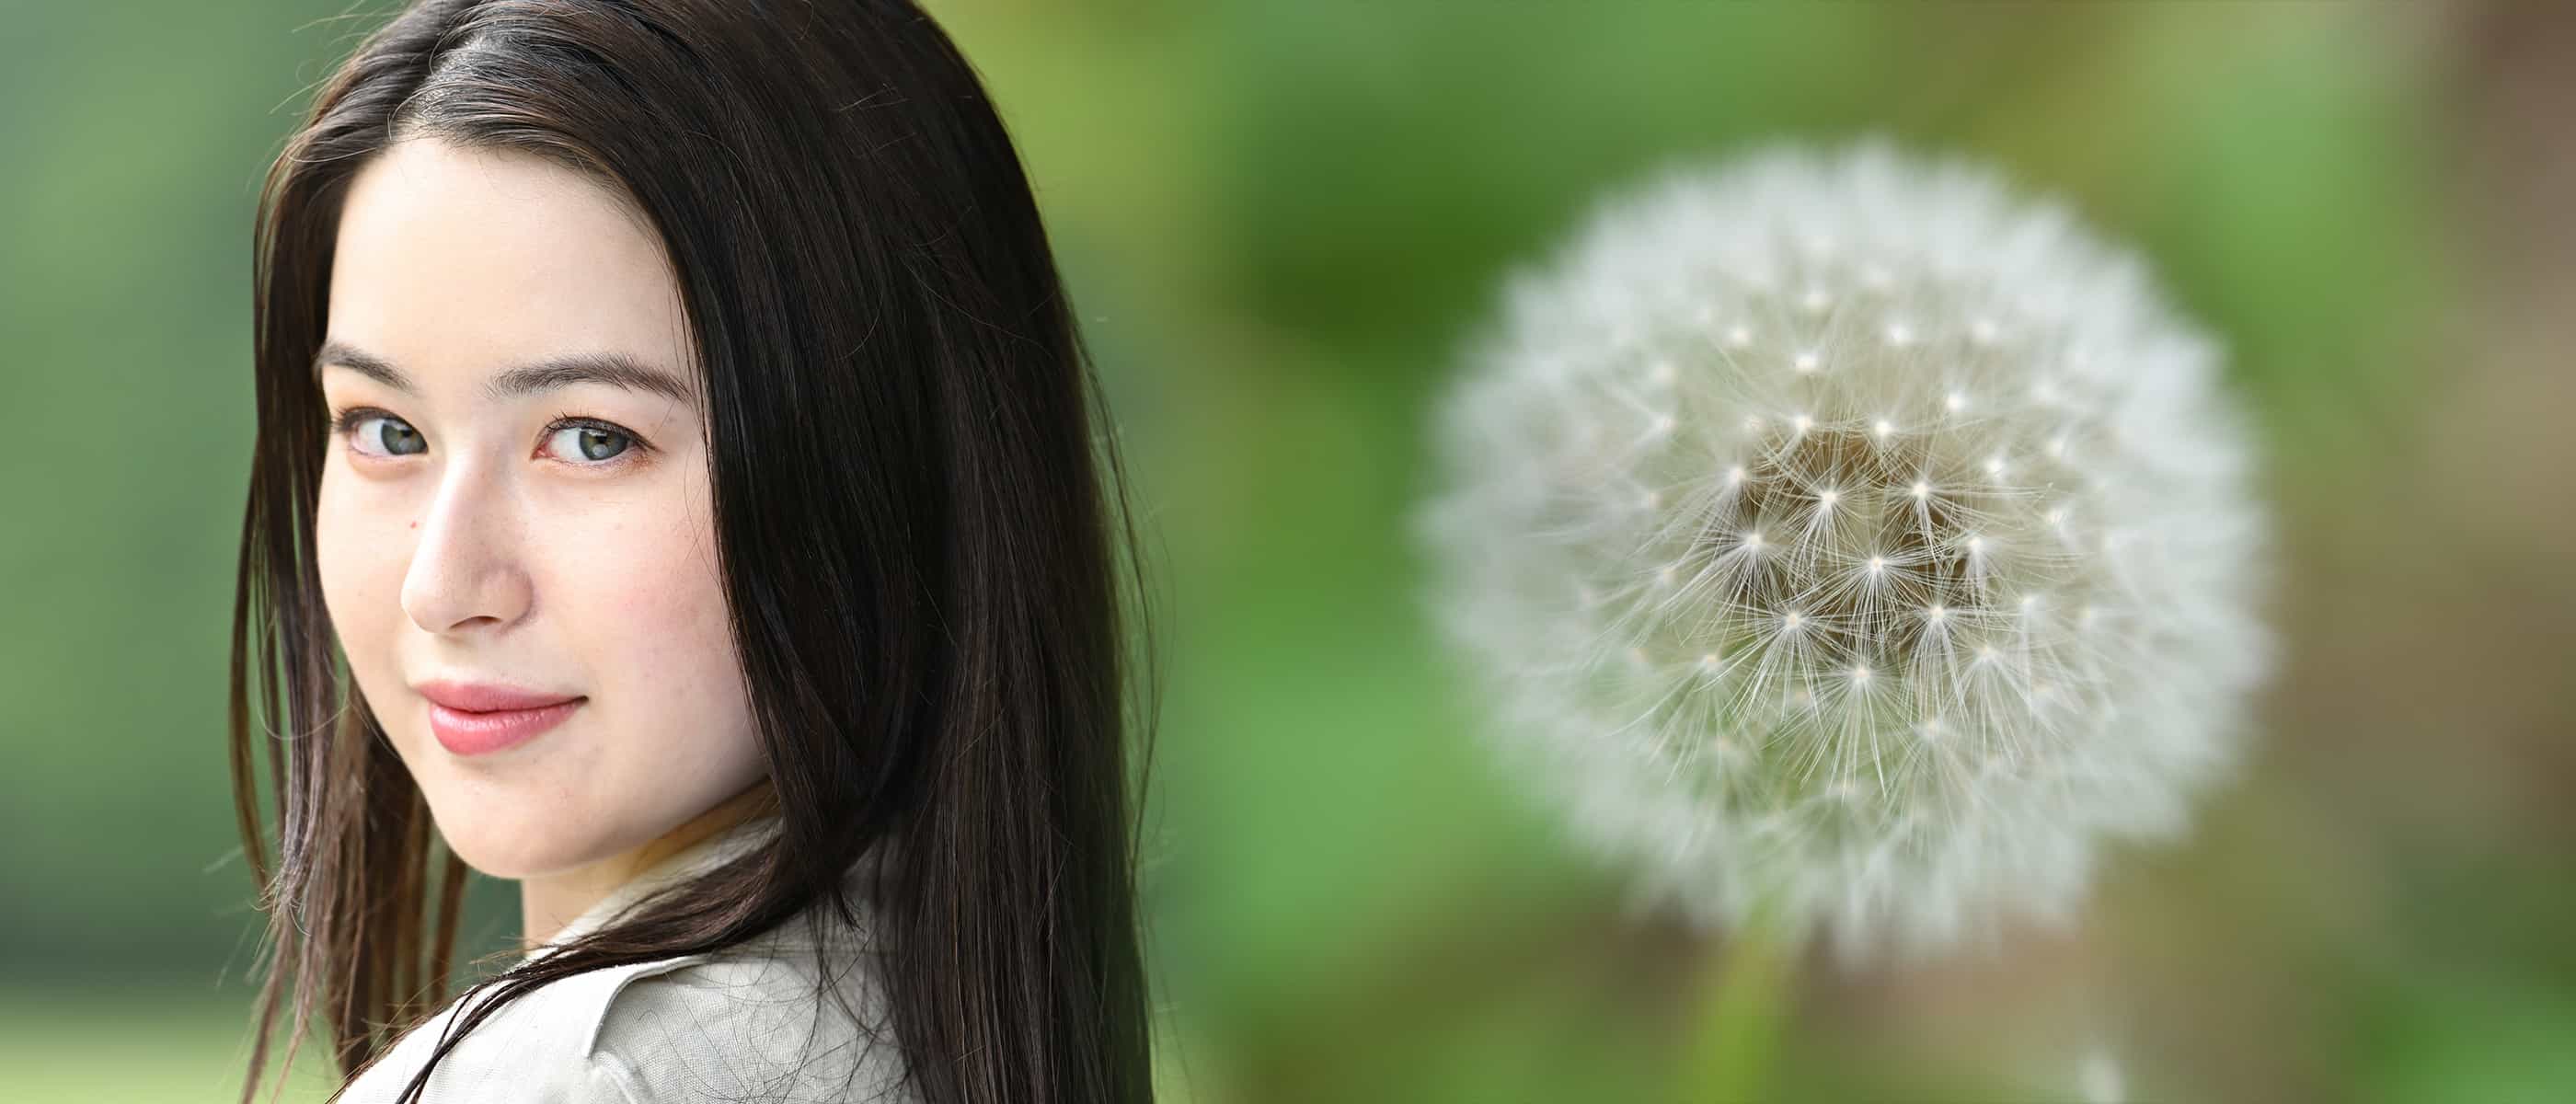 photo of a girl and a dandelion, taken with the NIKKOR Z 70-180mm f/2.8 lens